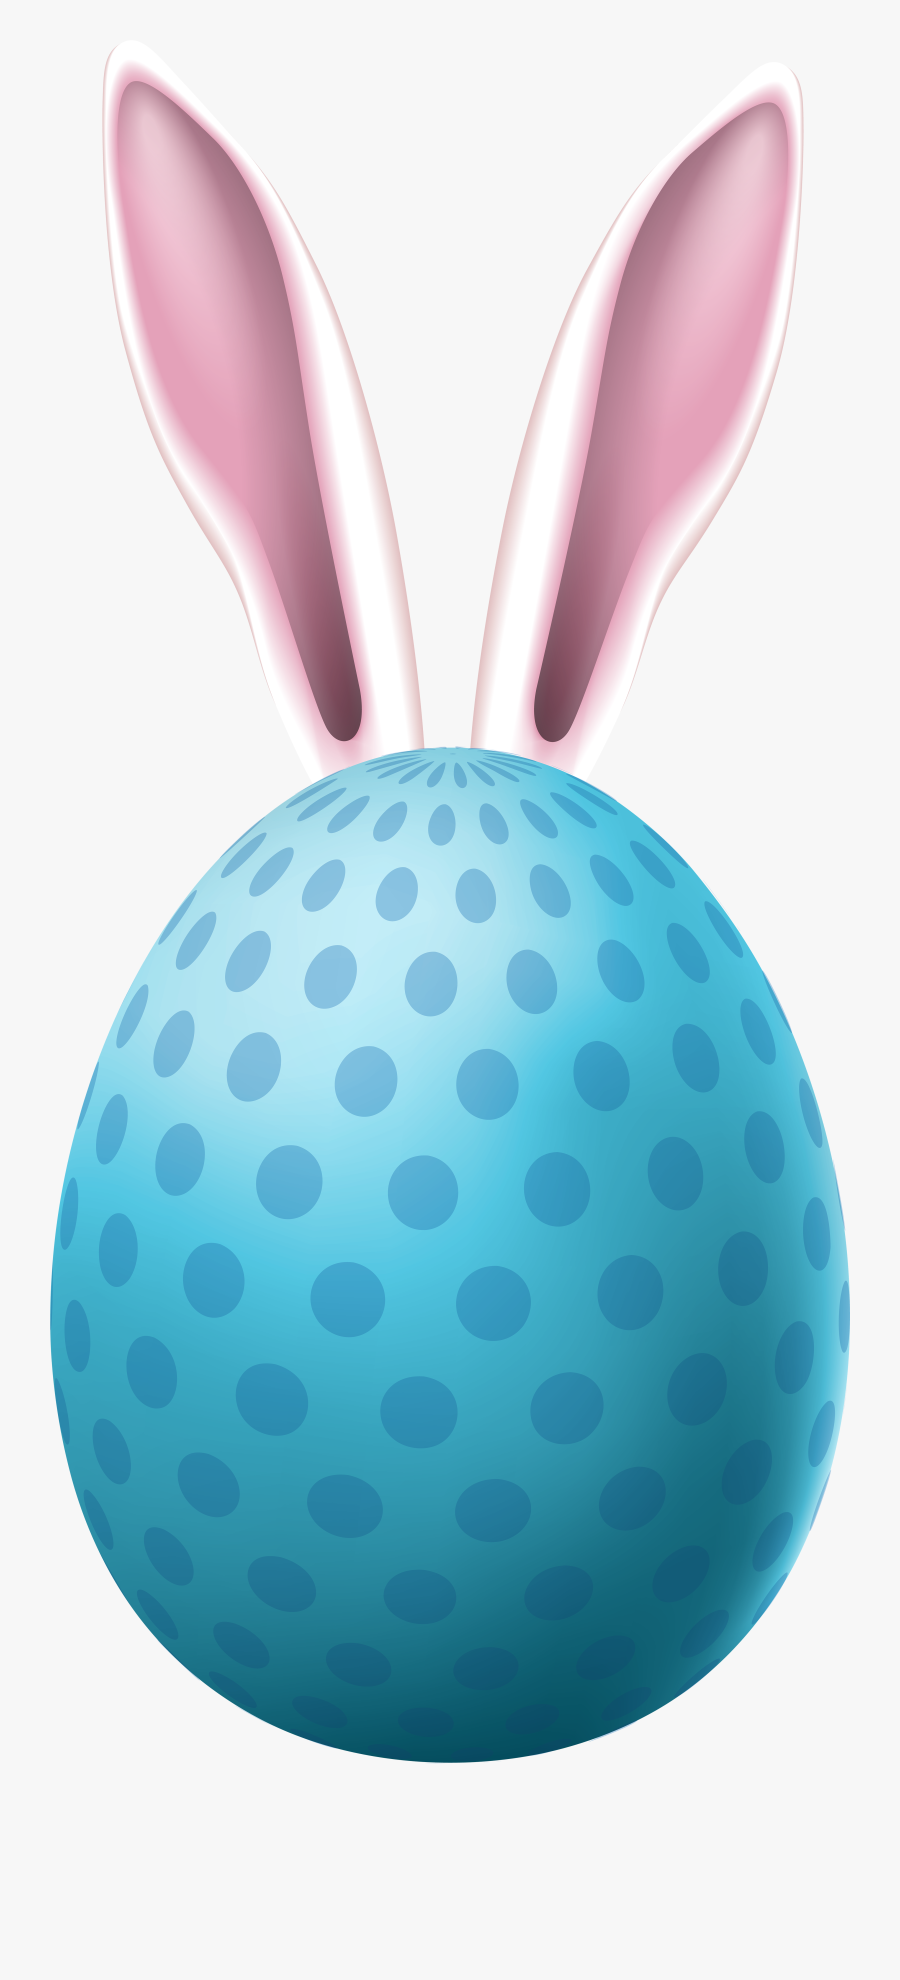 Egg With Bunny Ears - Easter Eggs With Bunny Ears, Transparent Clipart